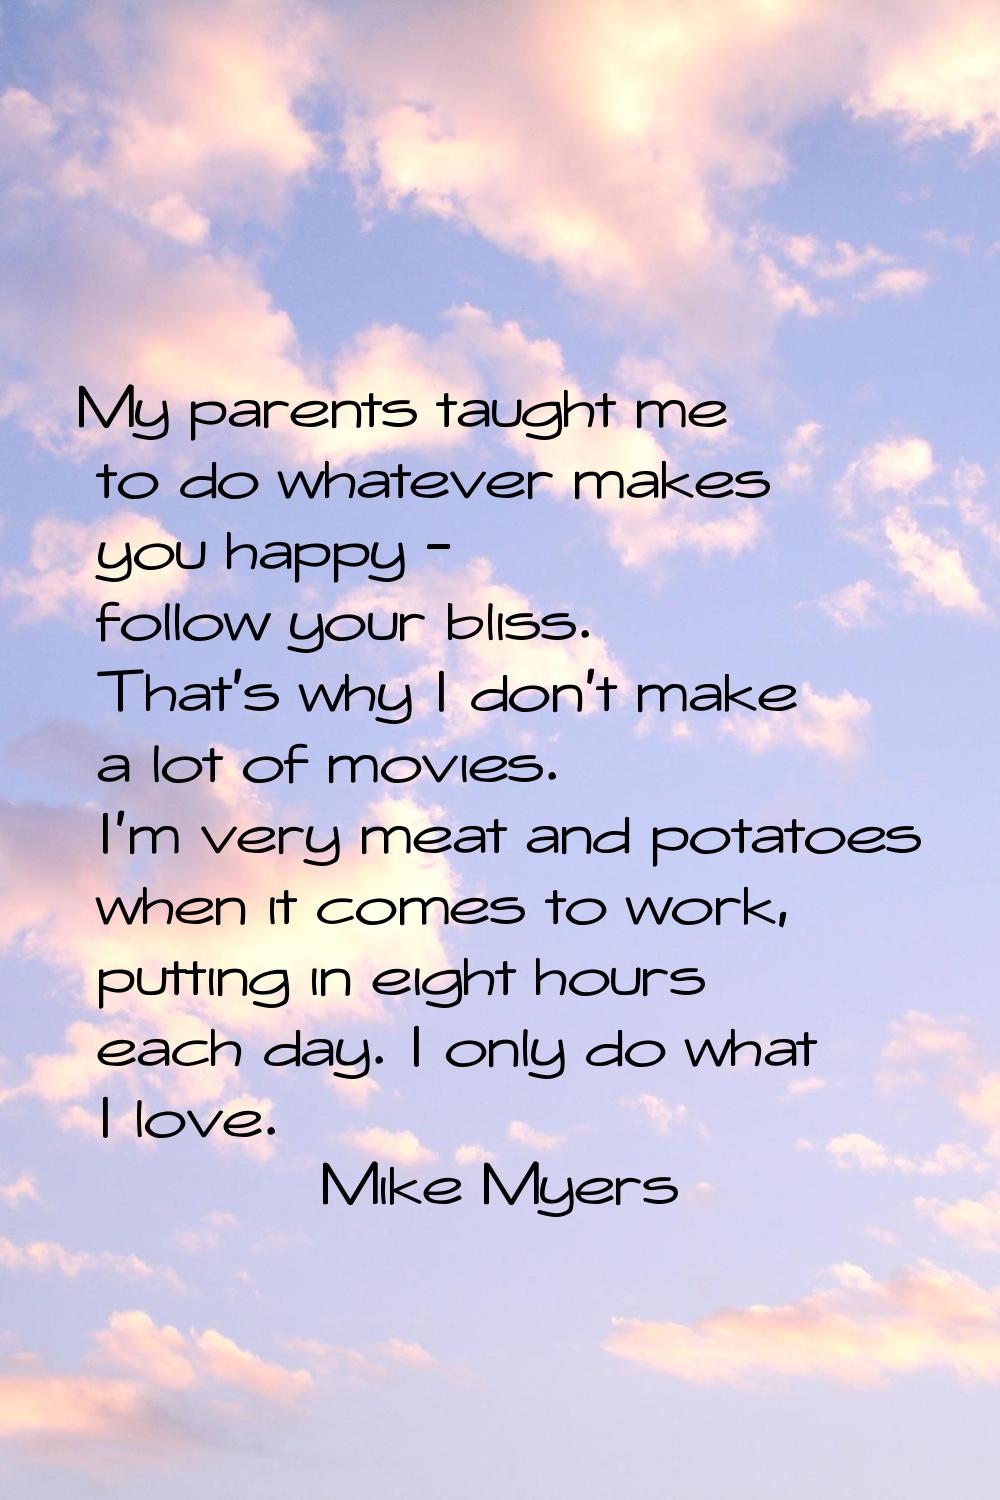 My parents taught me to do whatever makes you happy - follow your bliss. That's why I don't make a 